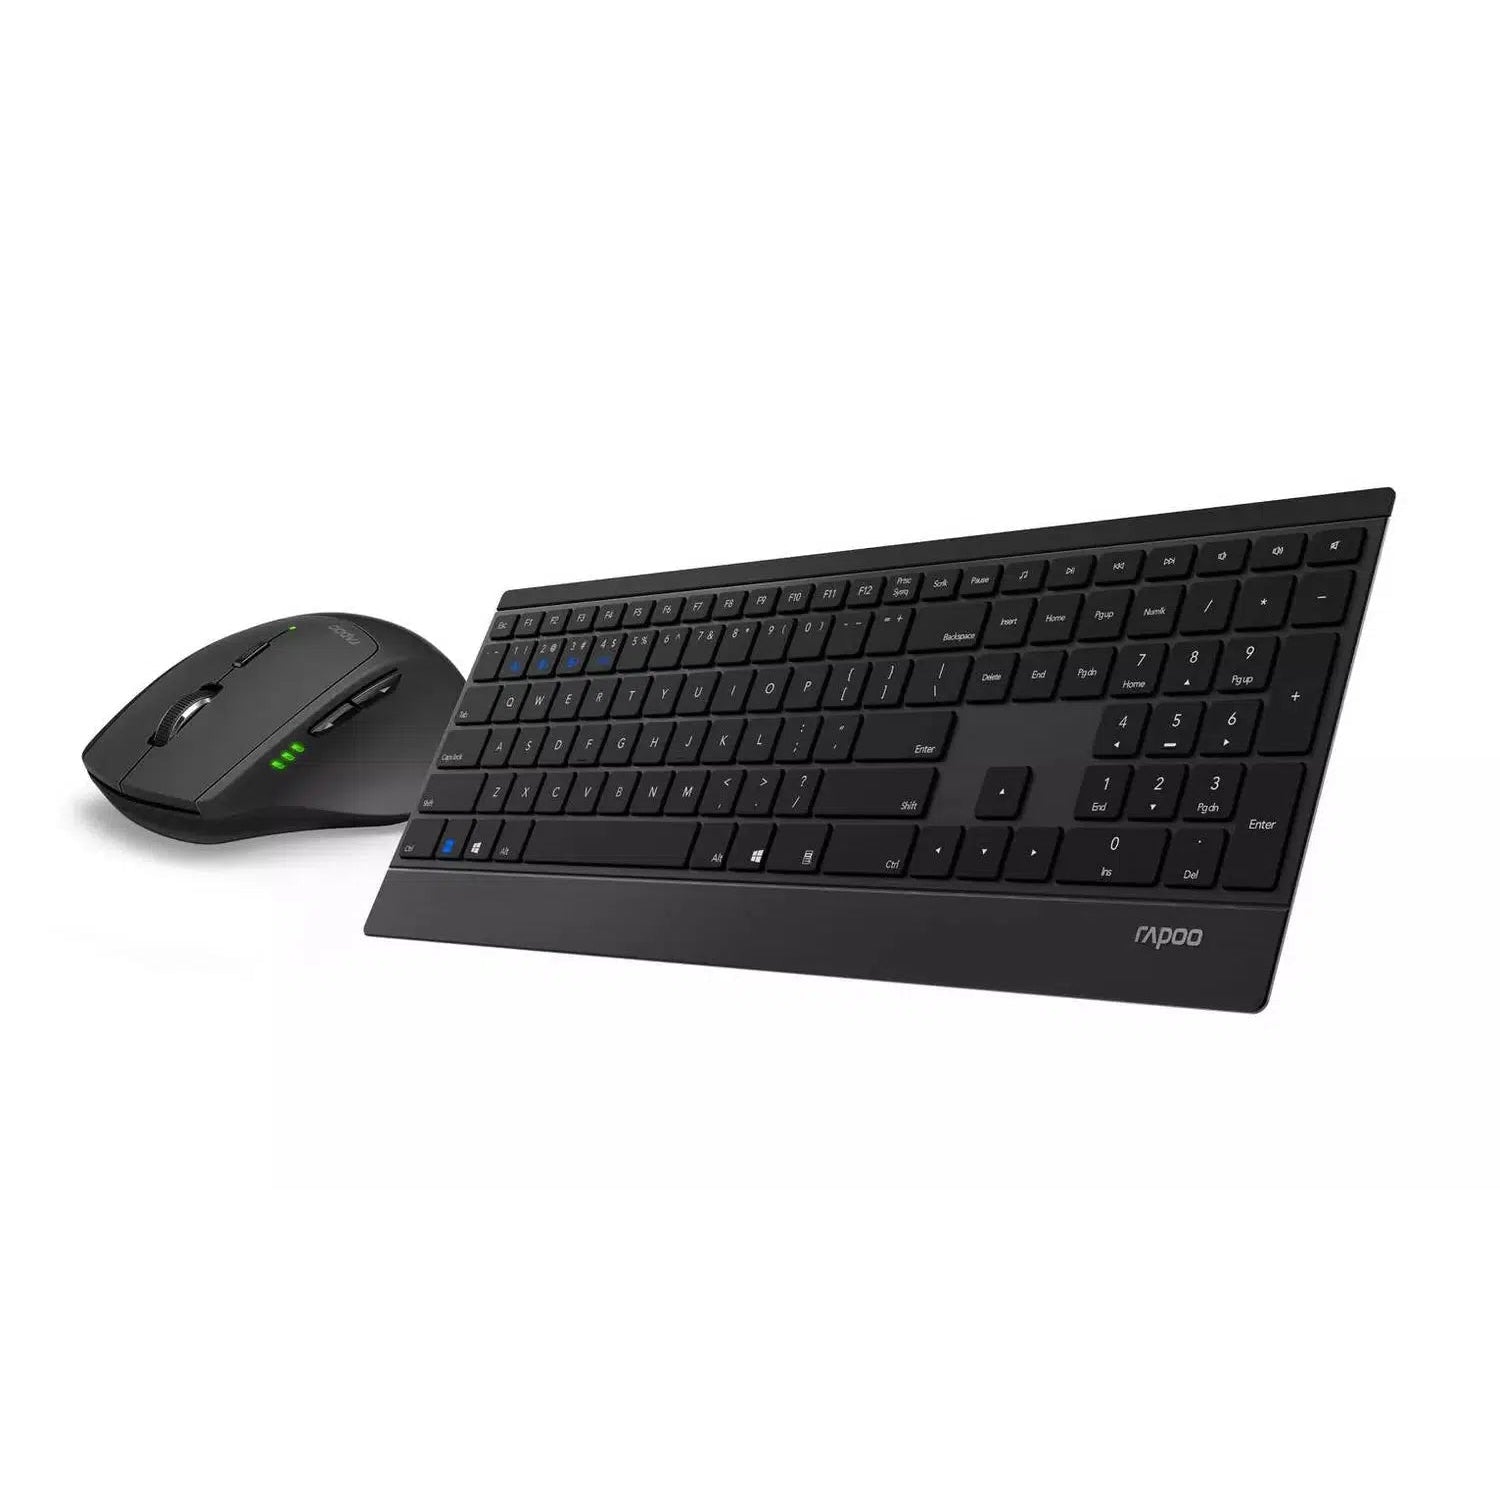 Rapoo 9500M Multi-Mode Wireless Mouse and Keyboard, Black - Refurbished Excellent